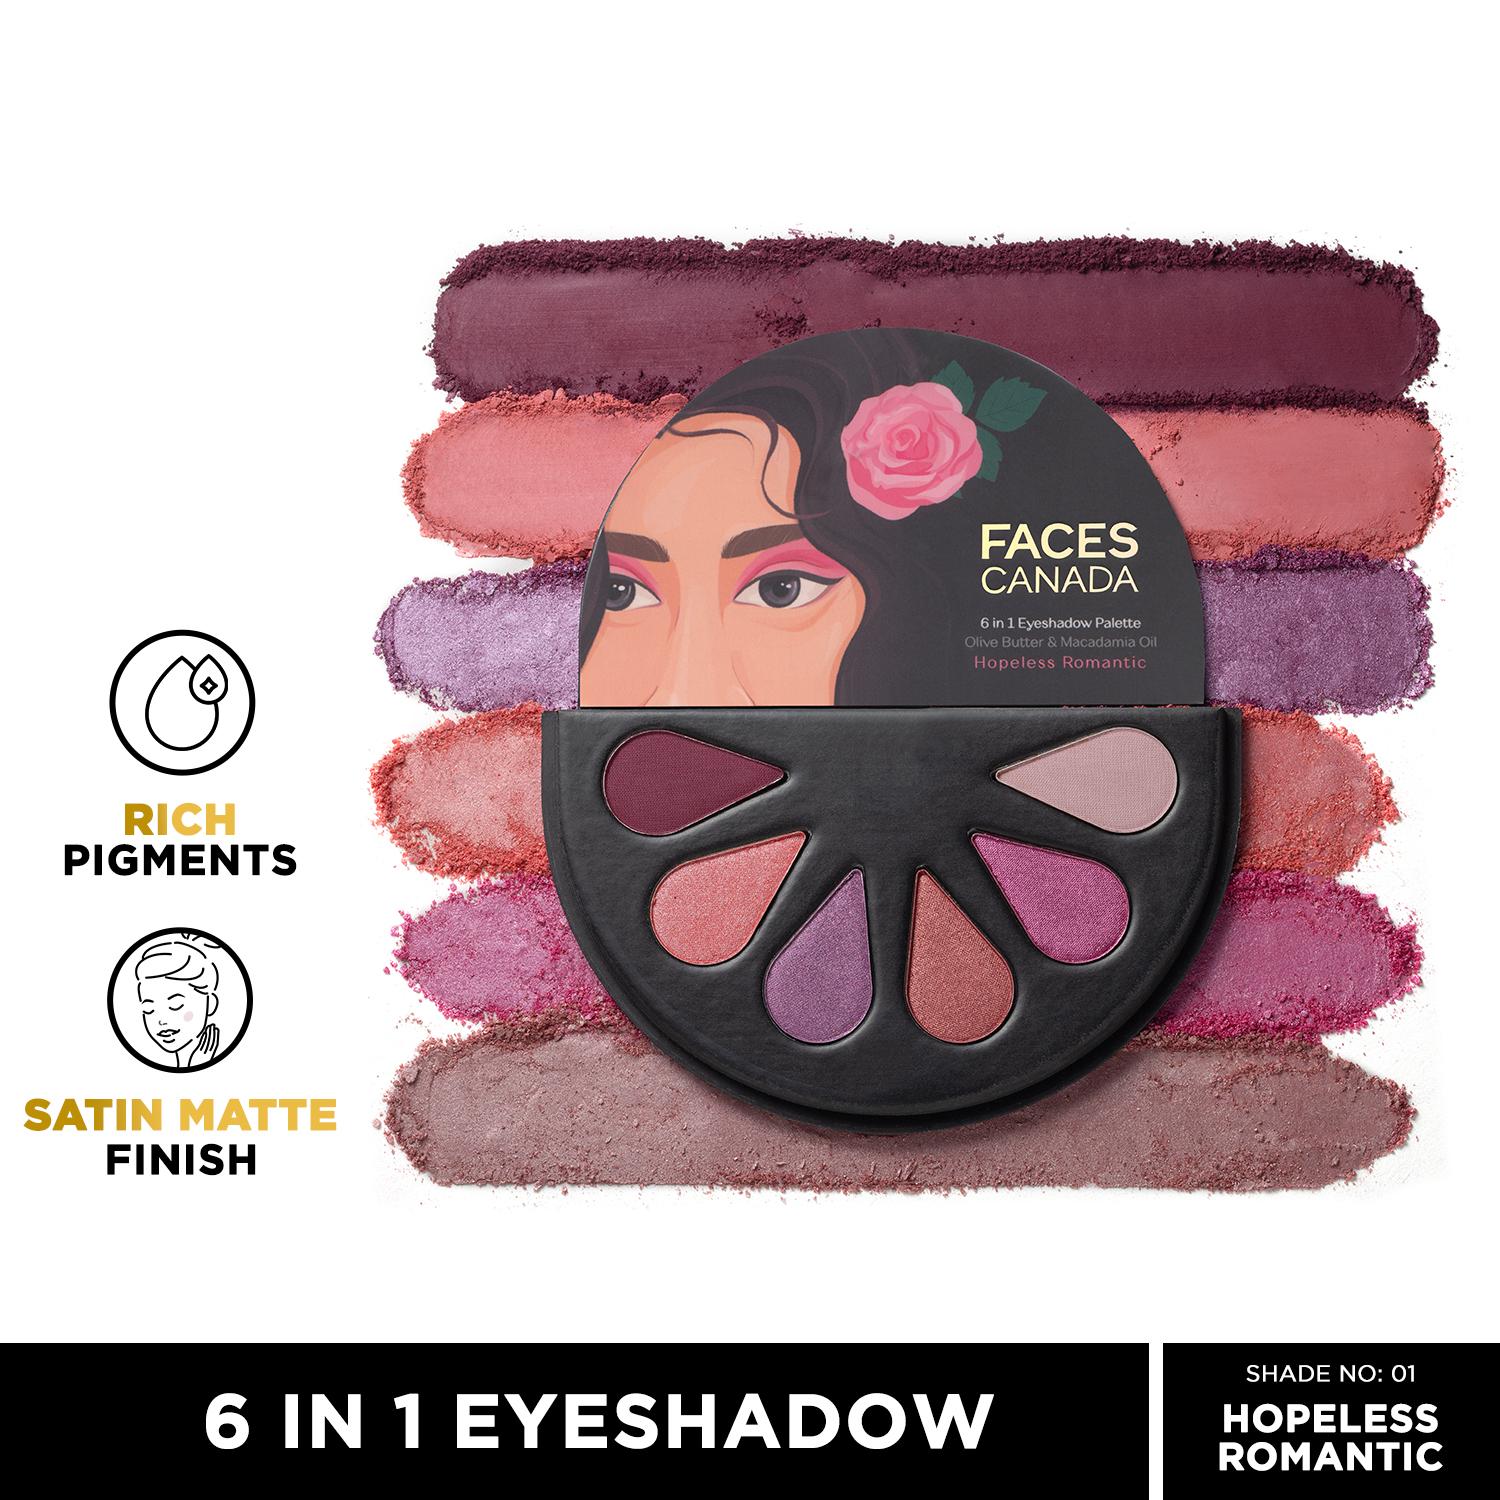 Faces Canada | Faces Canada 6-In-1 Eyeshadow Palette - 01 Hopeless Romantic (6g)